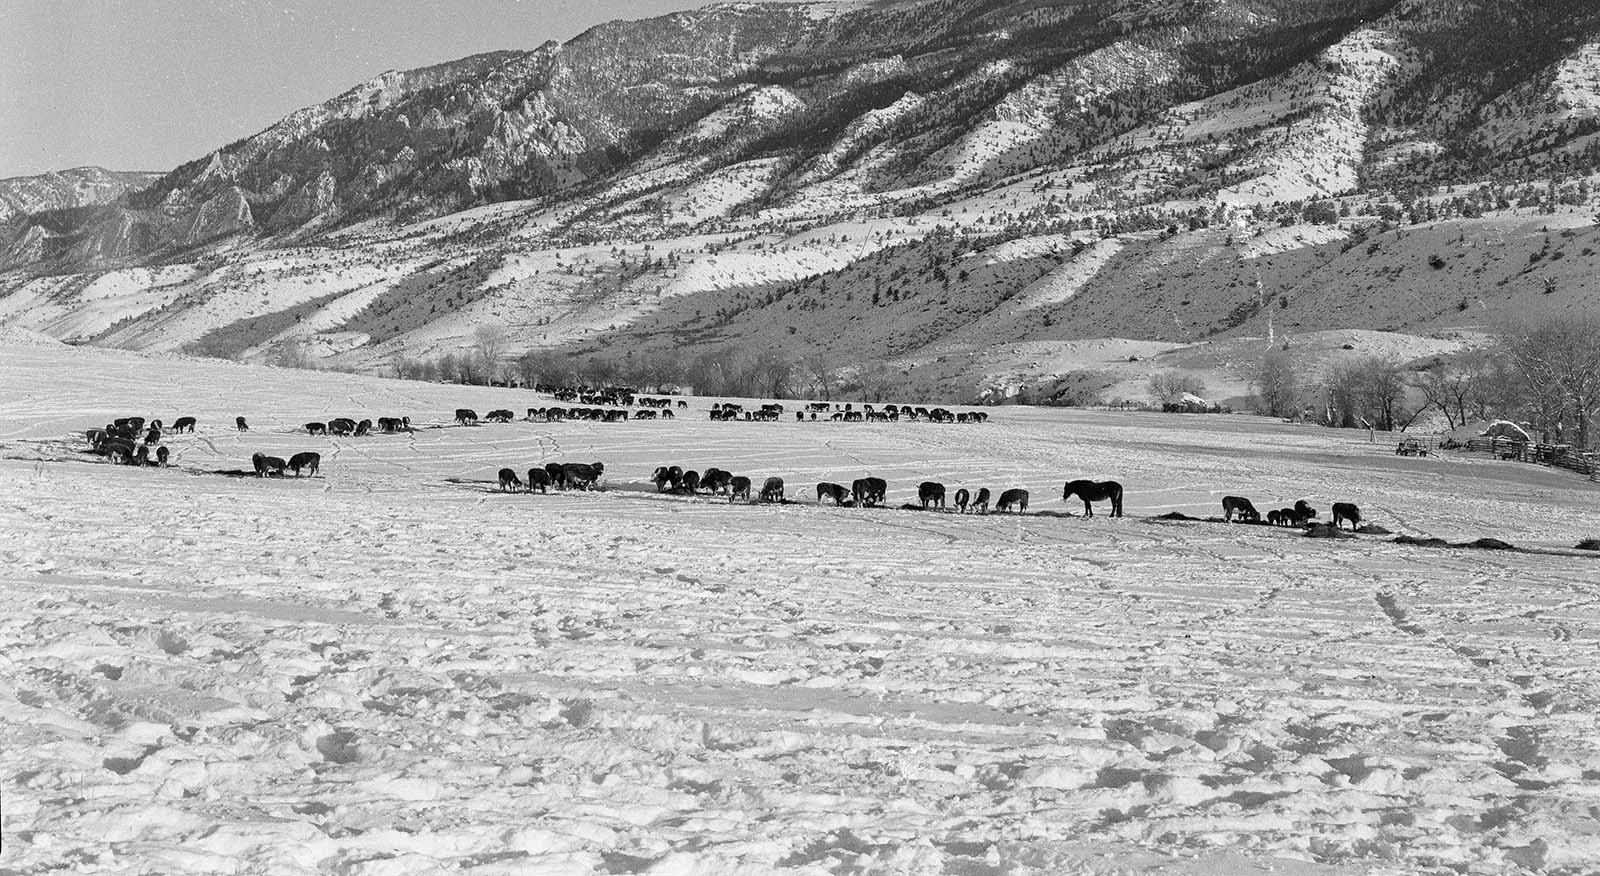 Herd of Herefords (and a wrangle horse) eating hay in a Rhoads' Ranch hayfield, December 1956. Rattlesnake Mountain and Rattlesnake Creek in background. MS 089 Jack Richard Photograph Collection, McCracken Research Library. PN.89.110.21160.19